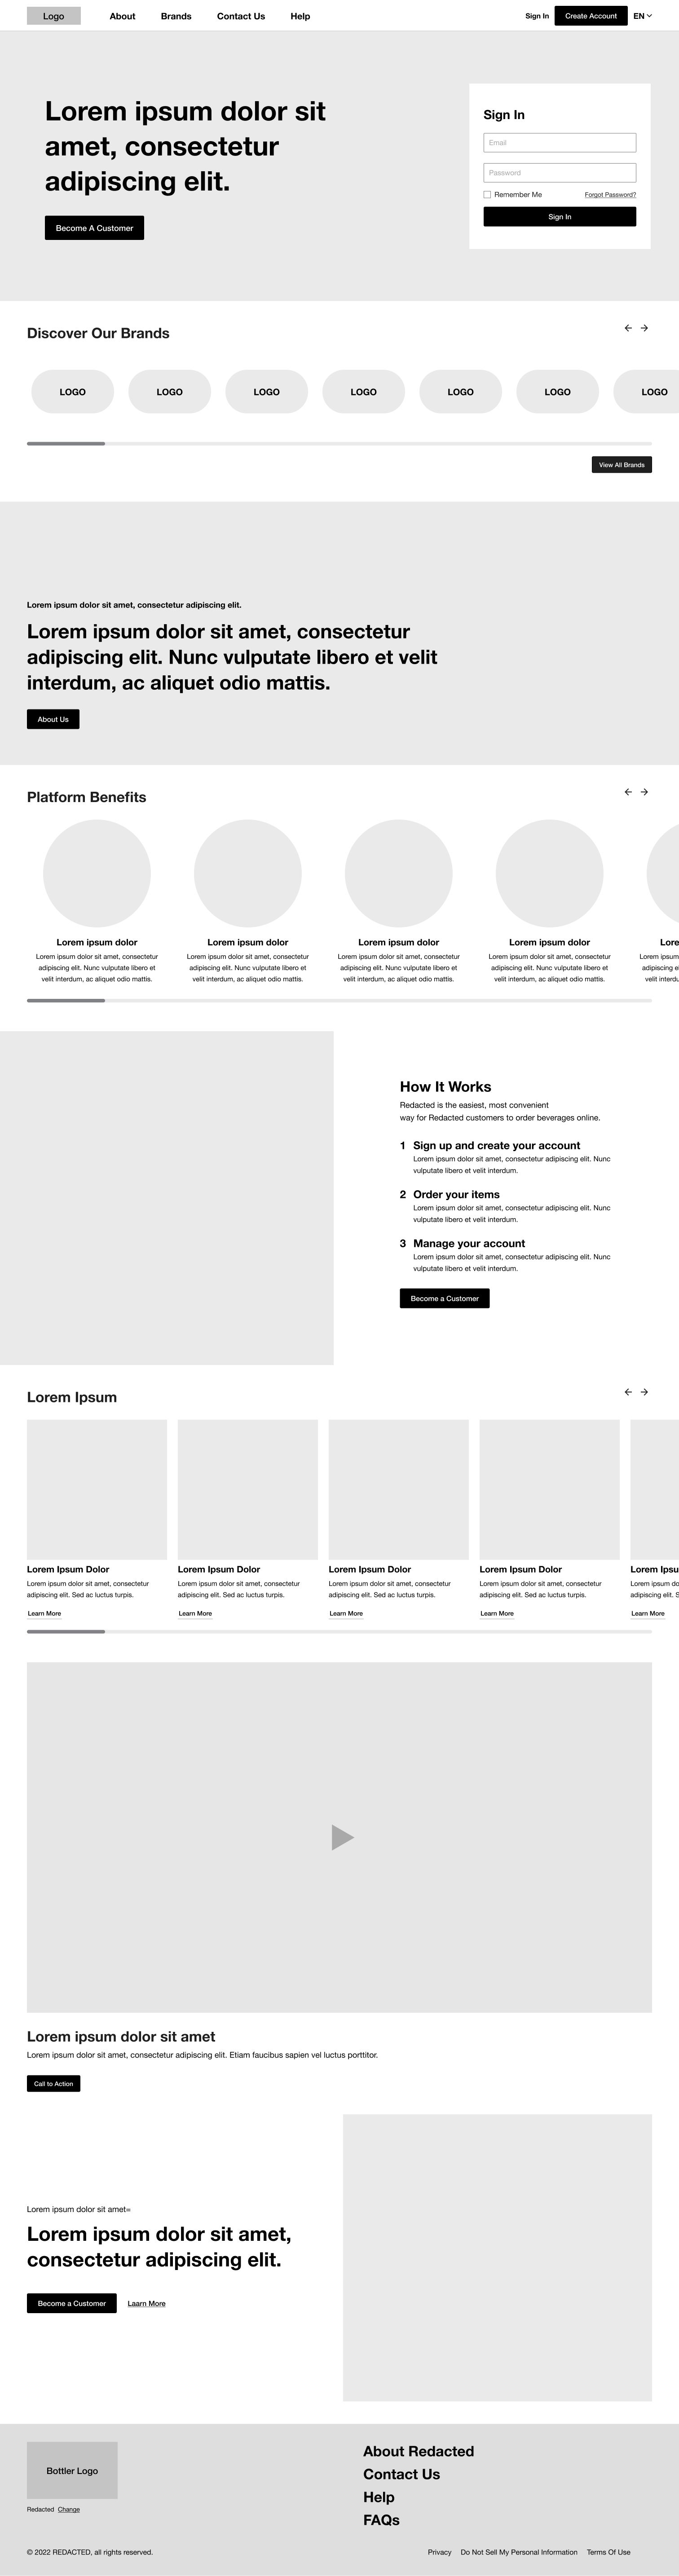 Wireframe of a guest homepage experience